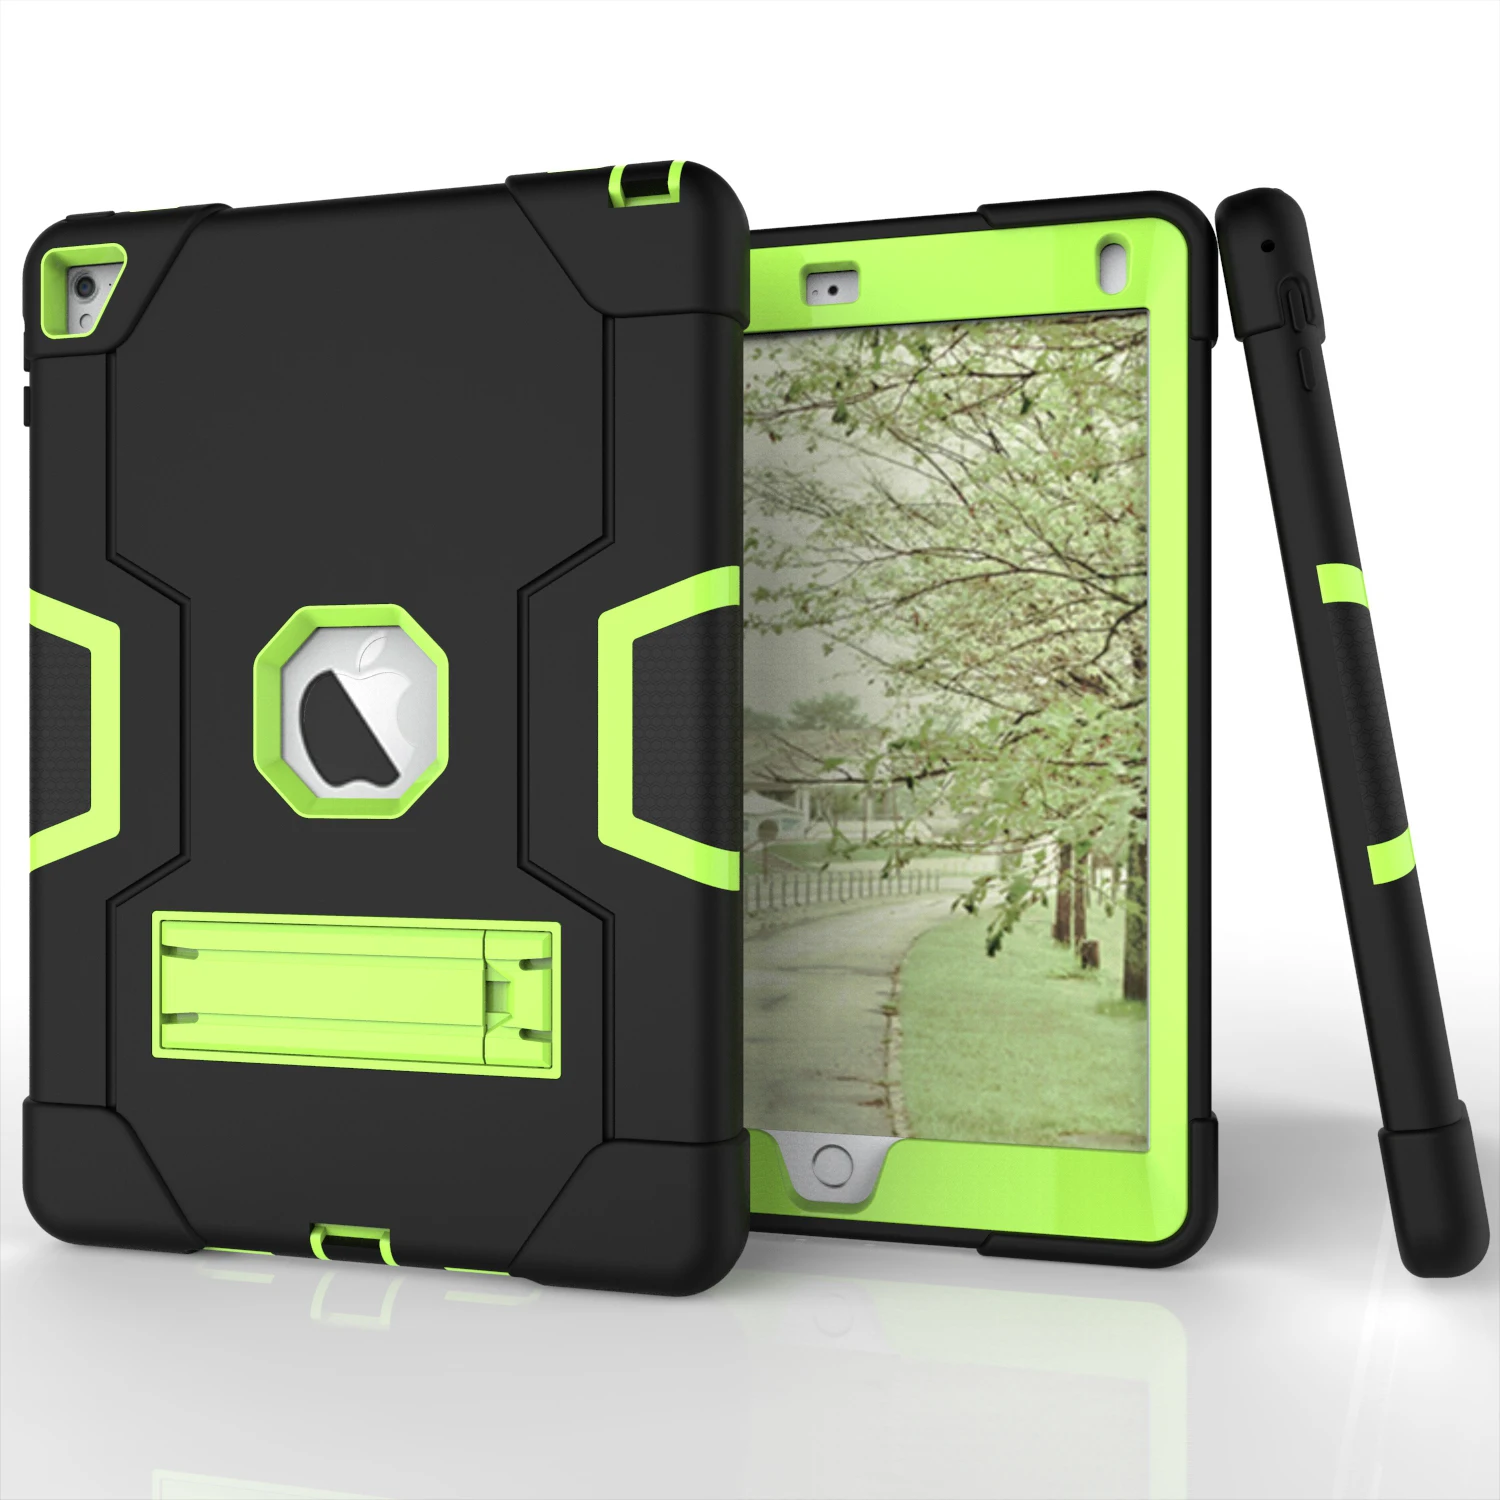 

Heavy Duty Tablet Case For iPad Air 2 / Pro 9.7 inch Rugged Impact Hybrid Armor Silicone Plastic Kickstand Shockproof Cover